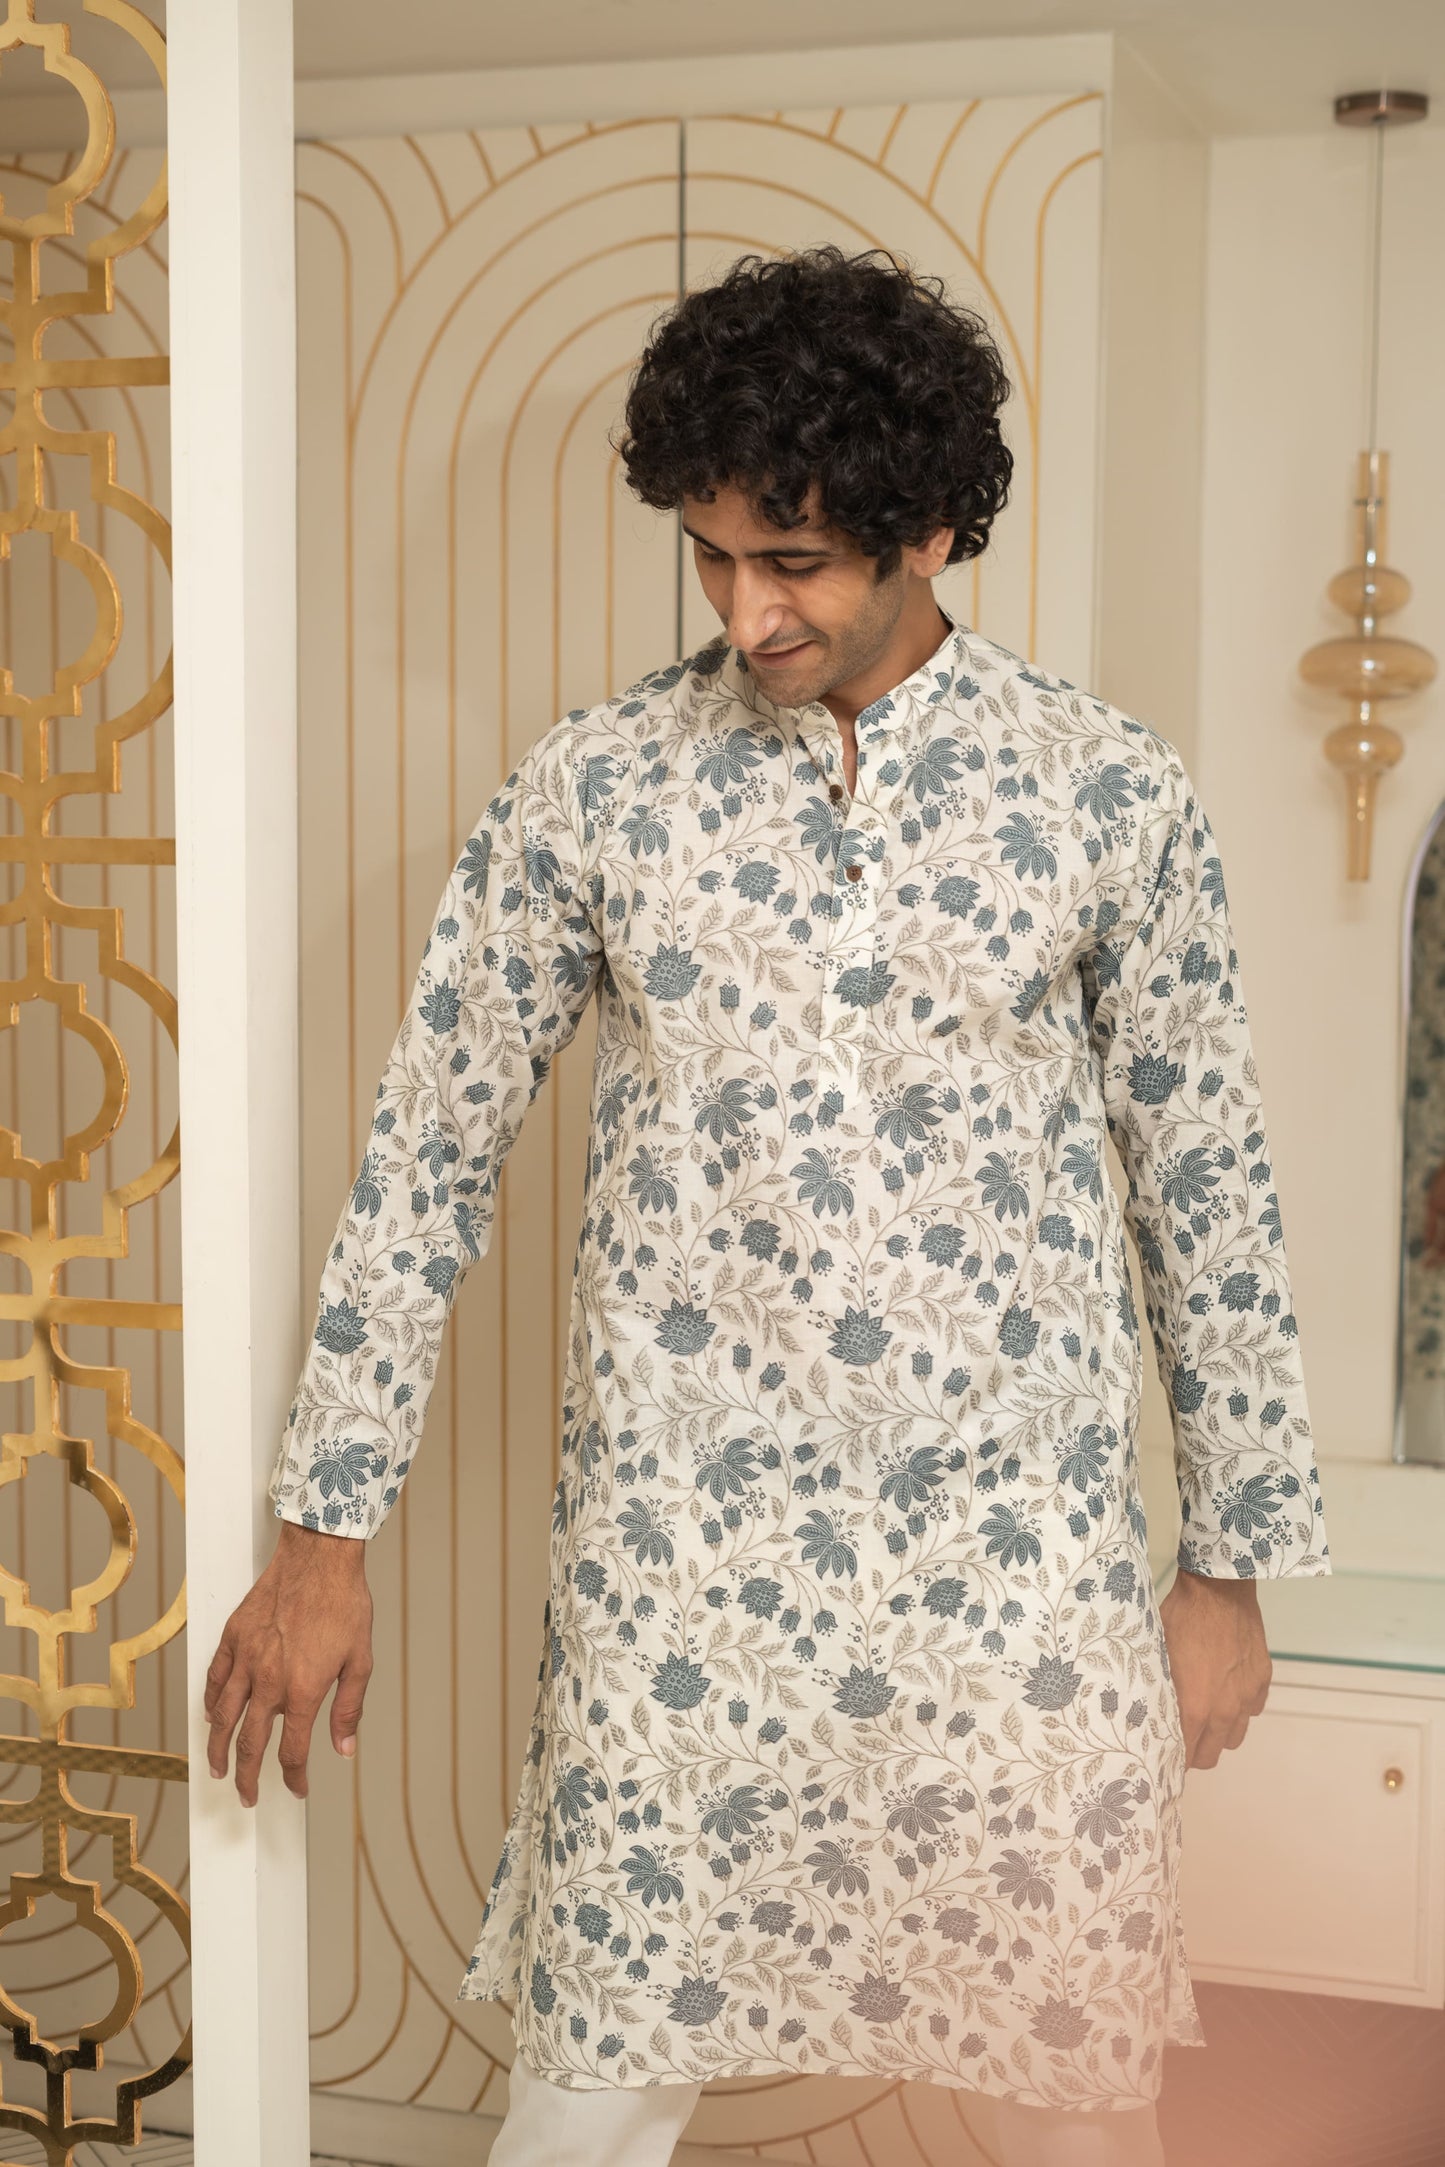 The White Long Kurta With All-Over Floral Print